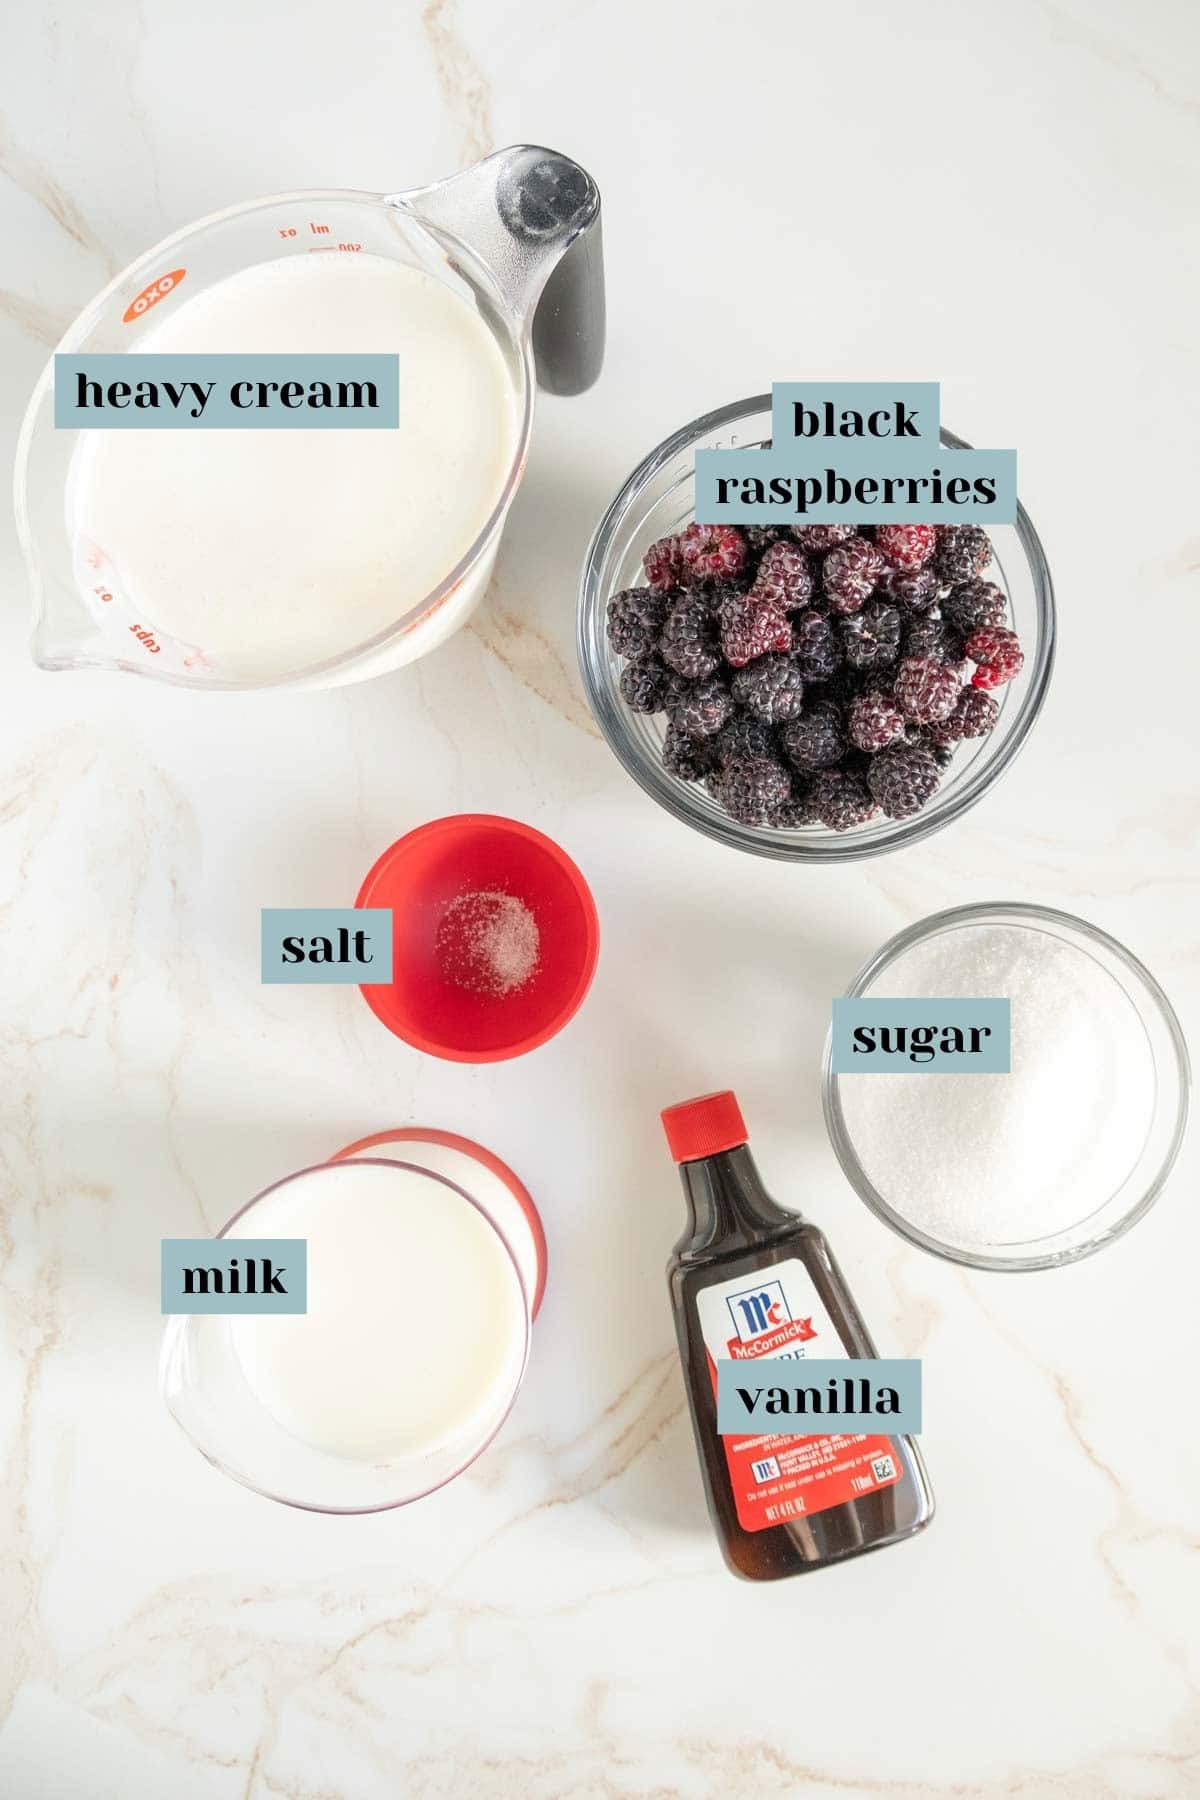 Ingredients laid out on a white surface: a measuring cup of heavy cream, a bowl of black raspberries, a small bowl of salt, a cup of milk, a container of vanilla extract, and a bowl of sugar.